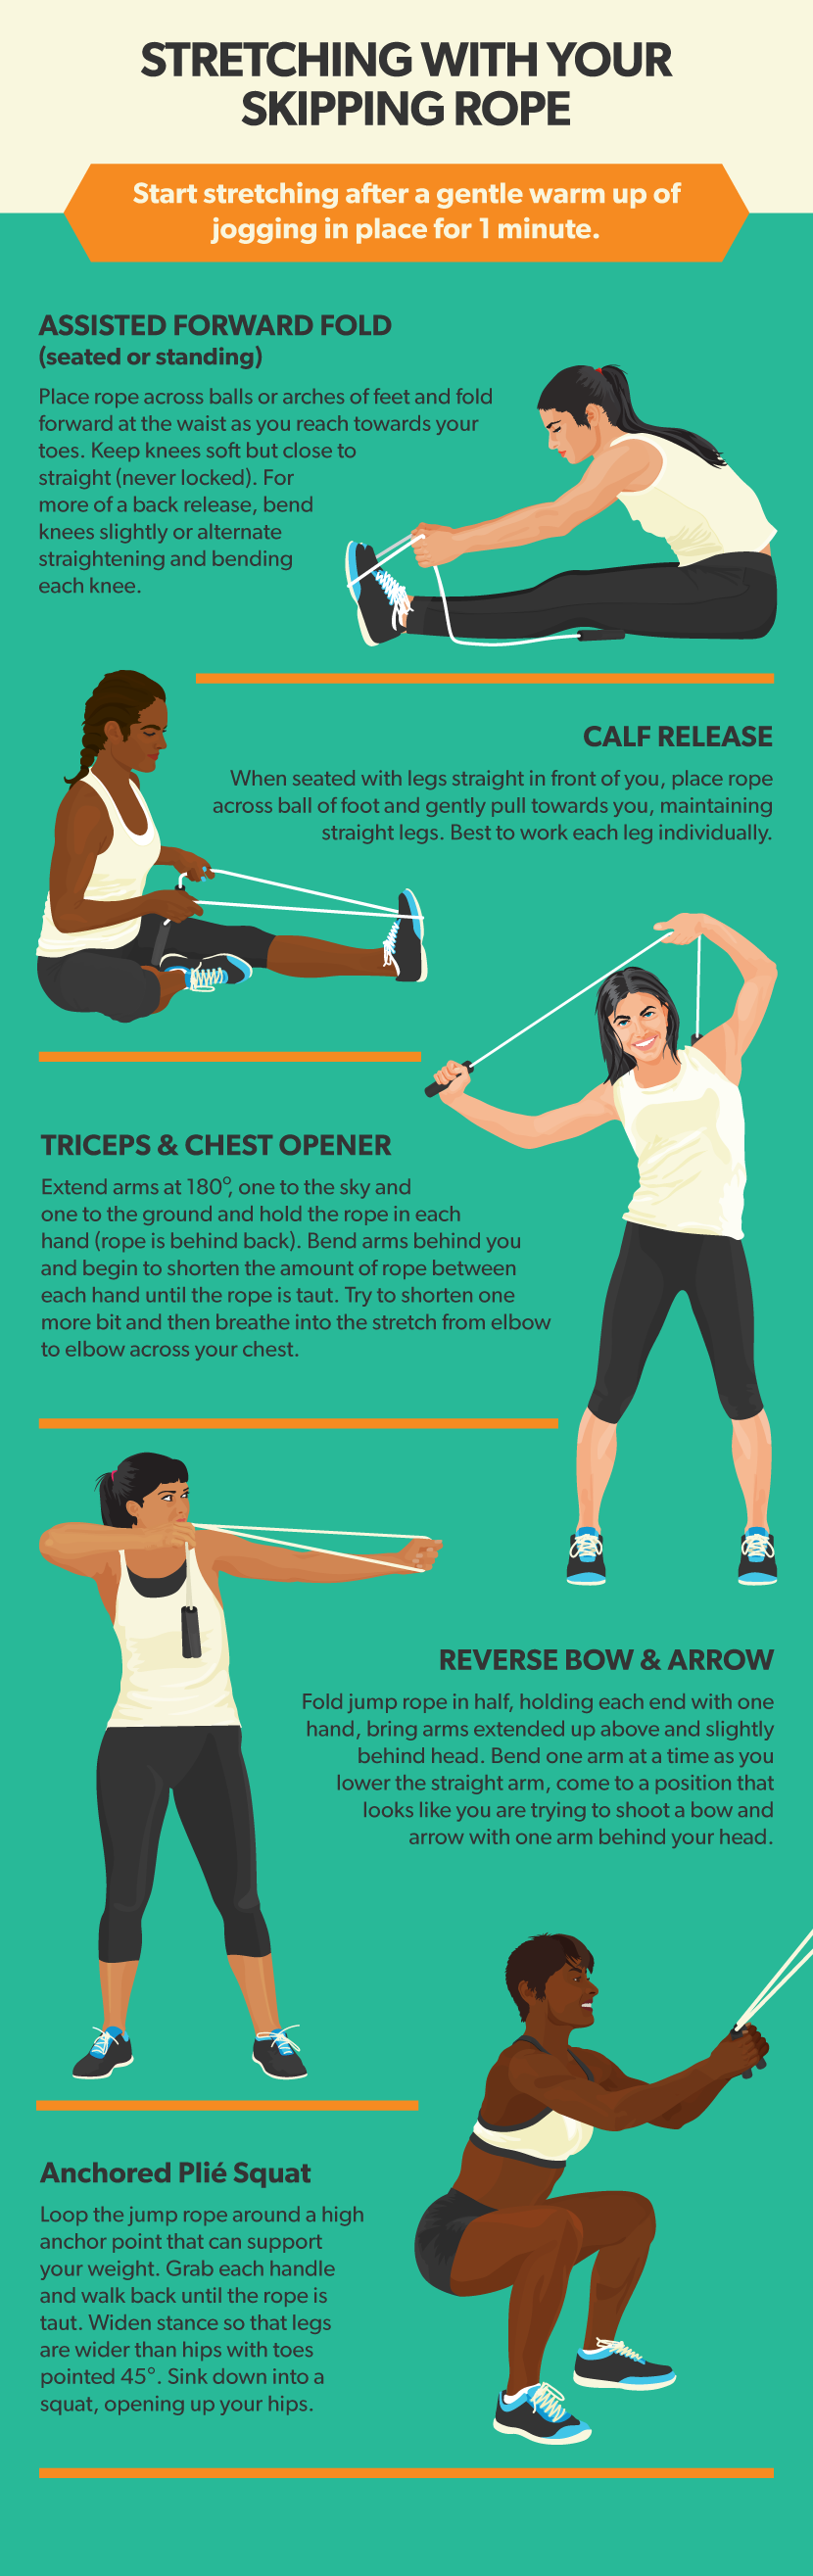 WW#9: Chest & Triceps Jump Rope HiiT